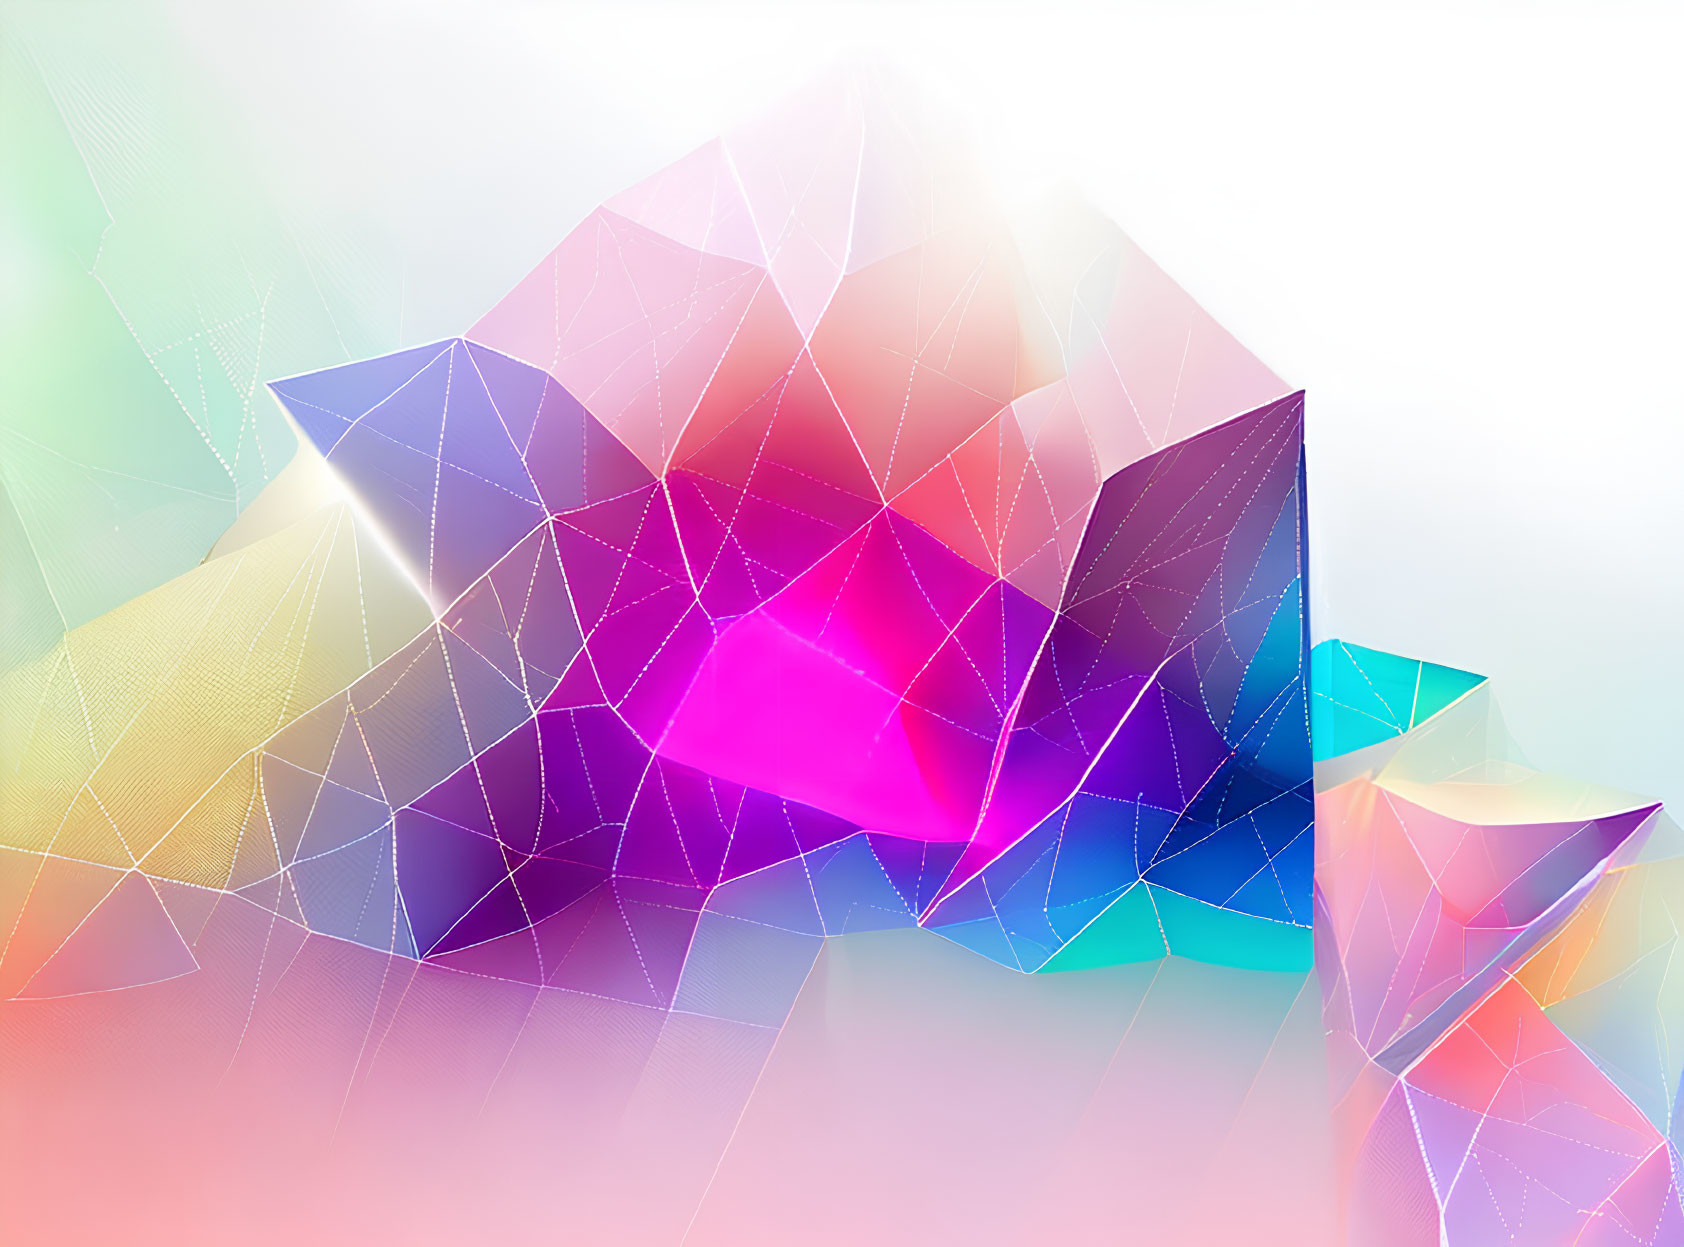 Vibrant low-poly geometric design in cool blues to warm pinks and yellows